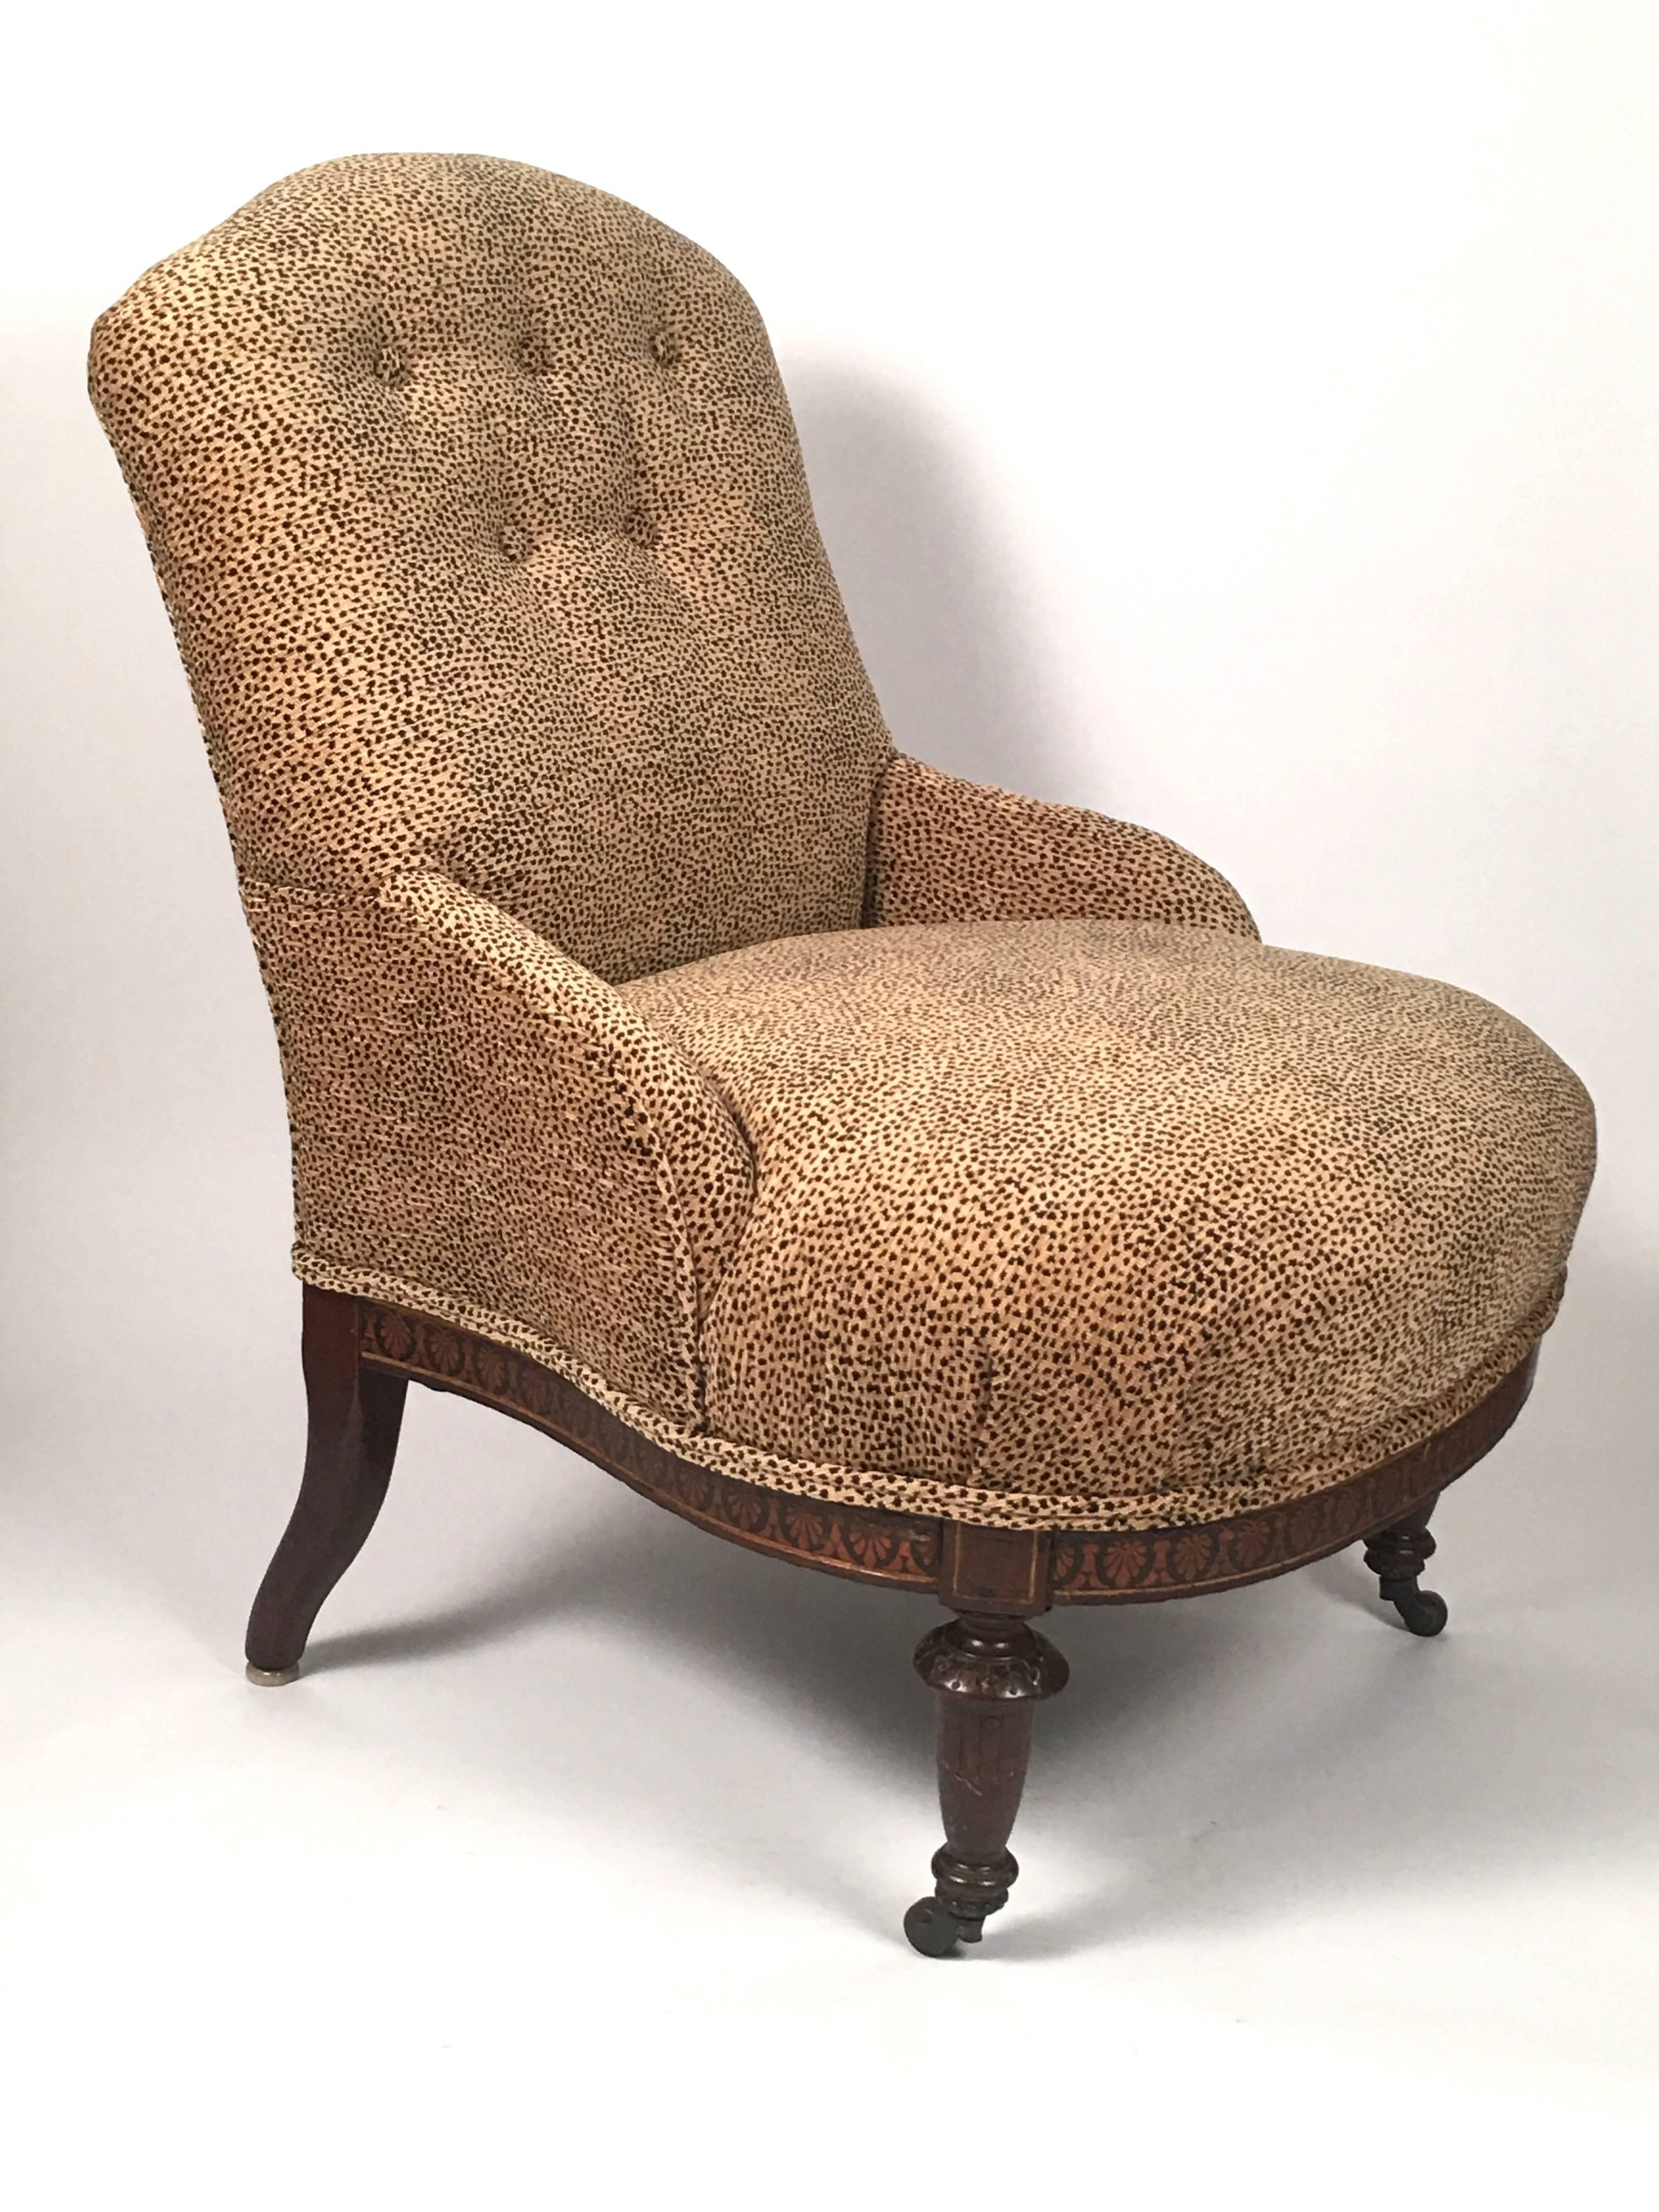 A neoclassical 19th century slipper chair, with an elaborately inlaid seat rail, decorated with anthemions, newly upholstered in a big quality leopard printed velvet, the curved, buttoned back with down swept arms over a comfortable, wide seat,